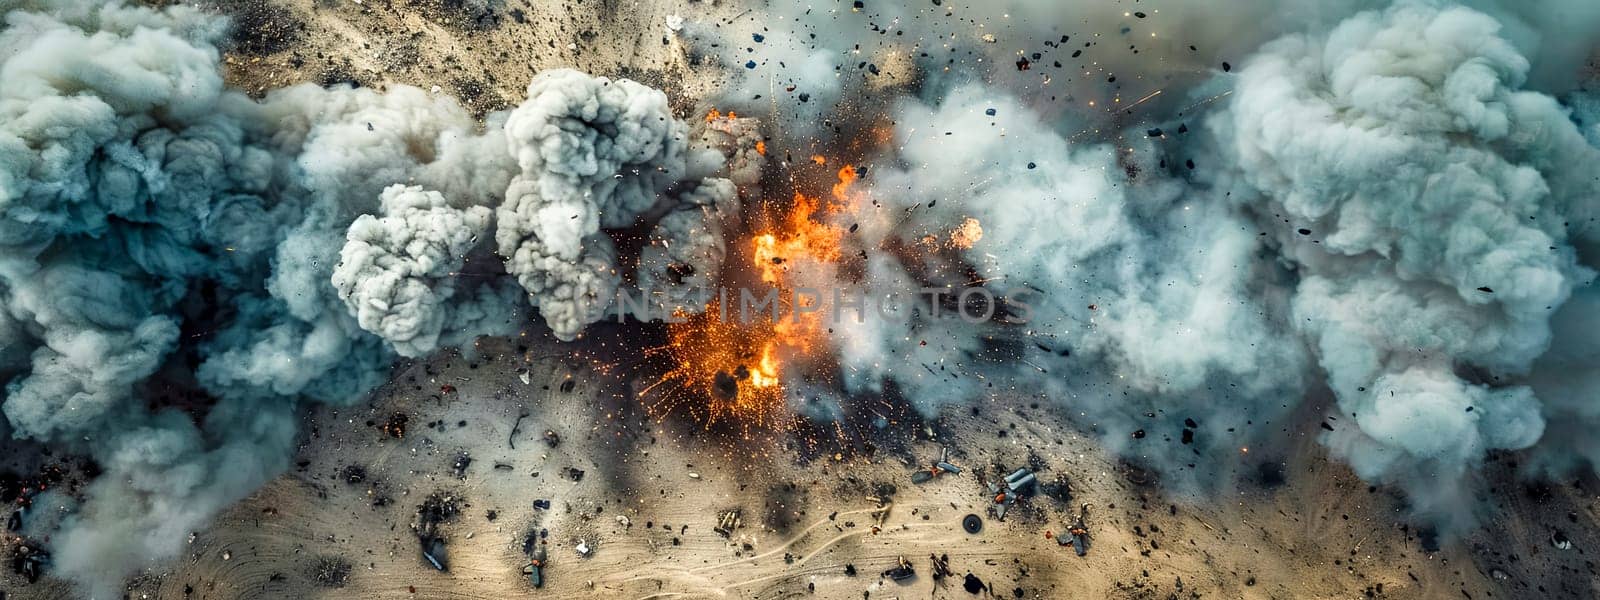 Explosive aerial view of a desert blast by Edophoto